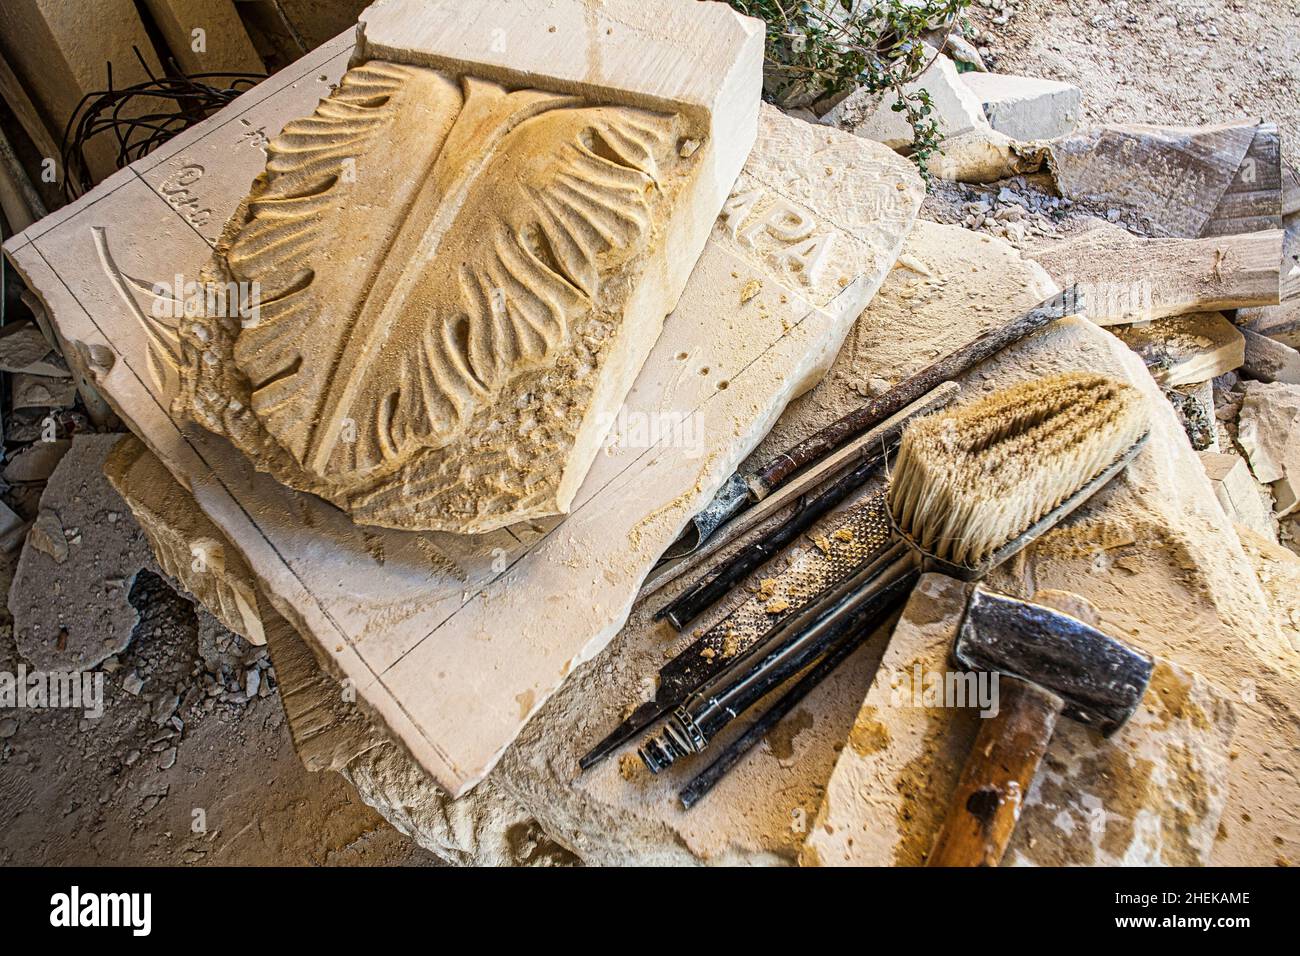 Handcrafted decoration carved in Maiella stone by an artisan master stonemason. Lettomanoppello, Pescara province, Abruzzo, Italy, Europe Stock Photo